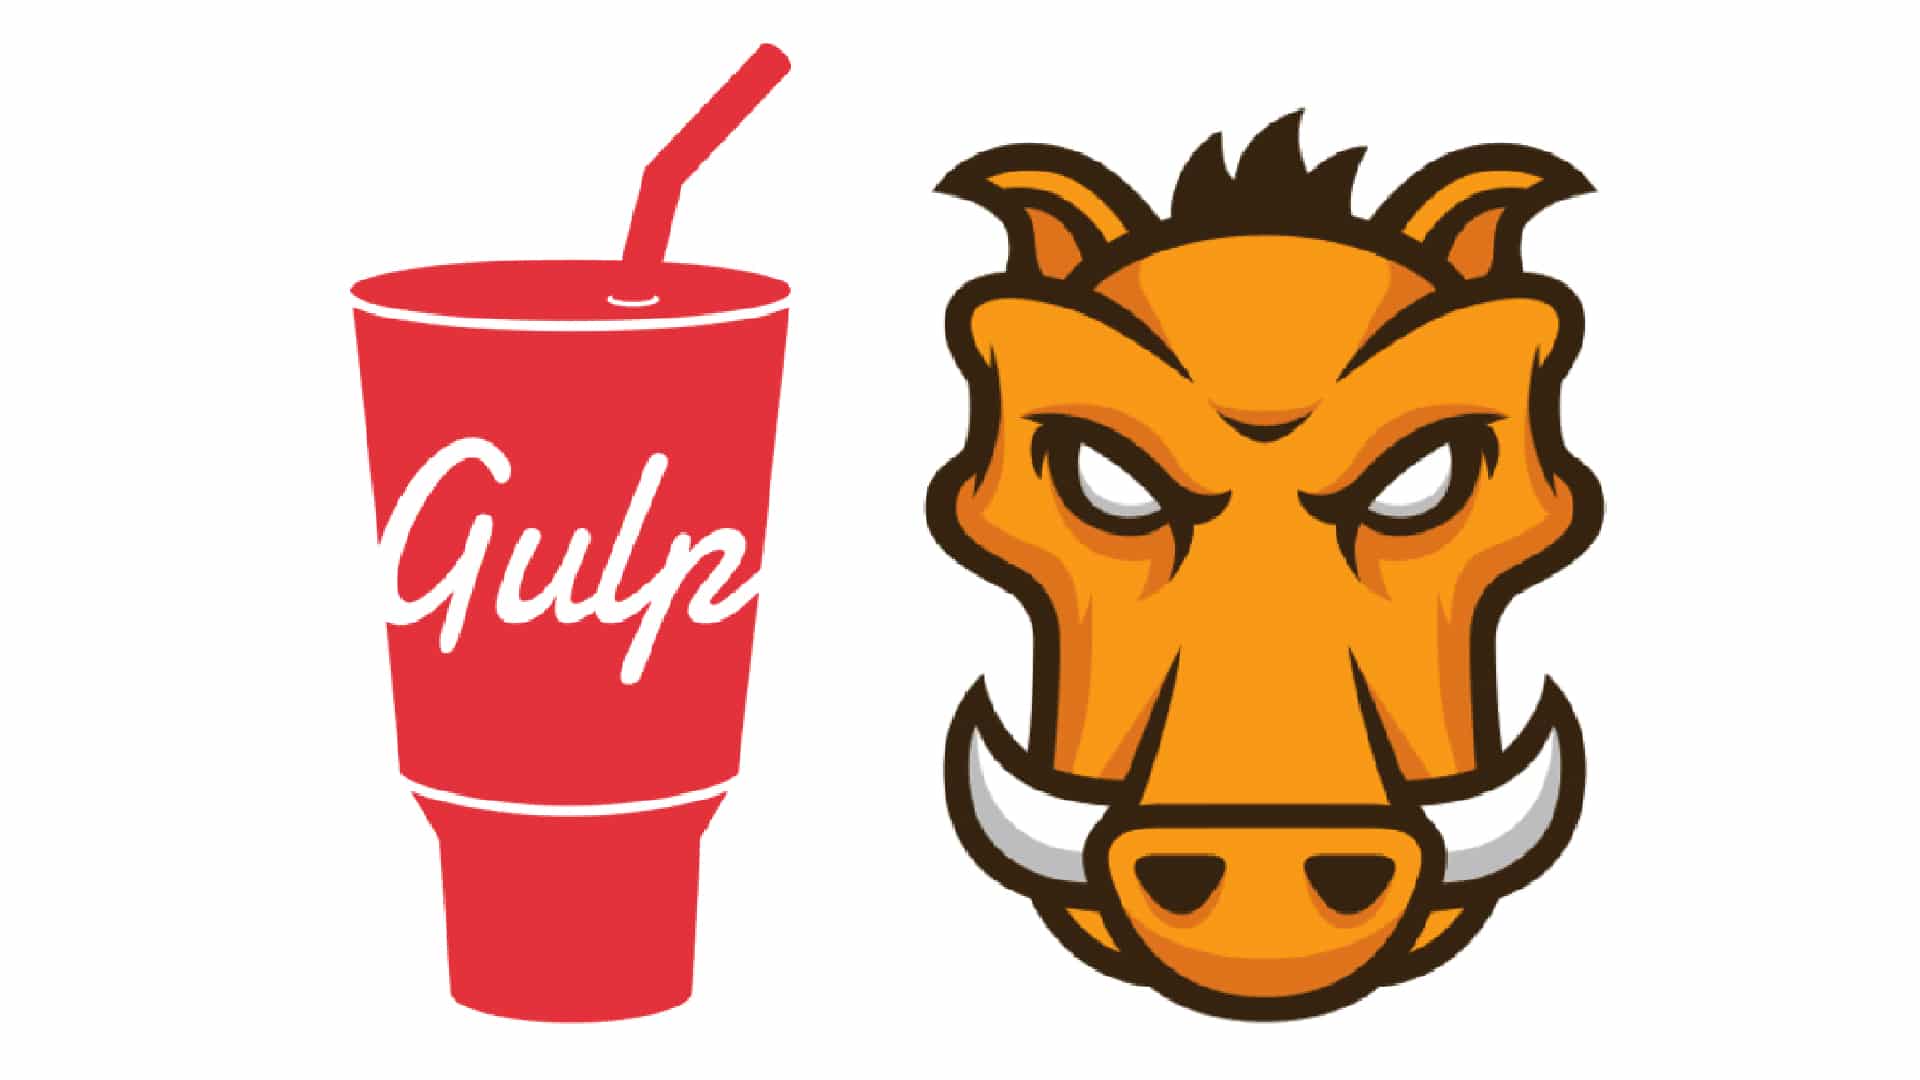 Managing your tasks with Grunt and gulp - Cohaesus